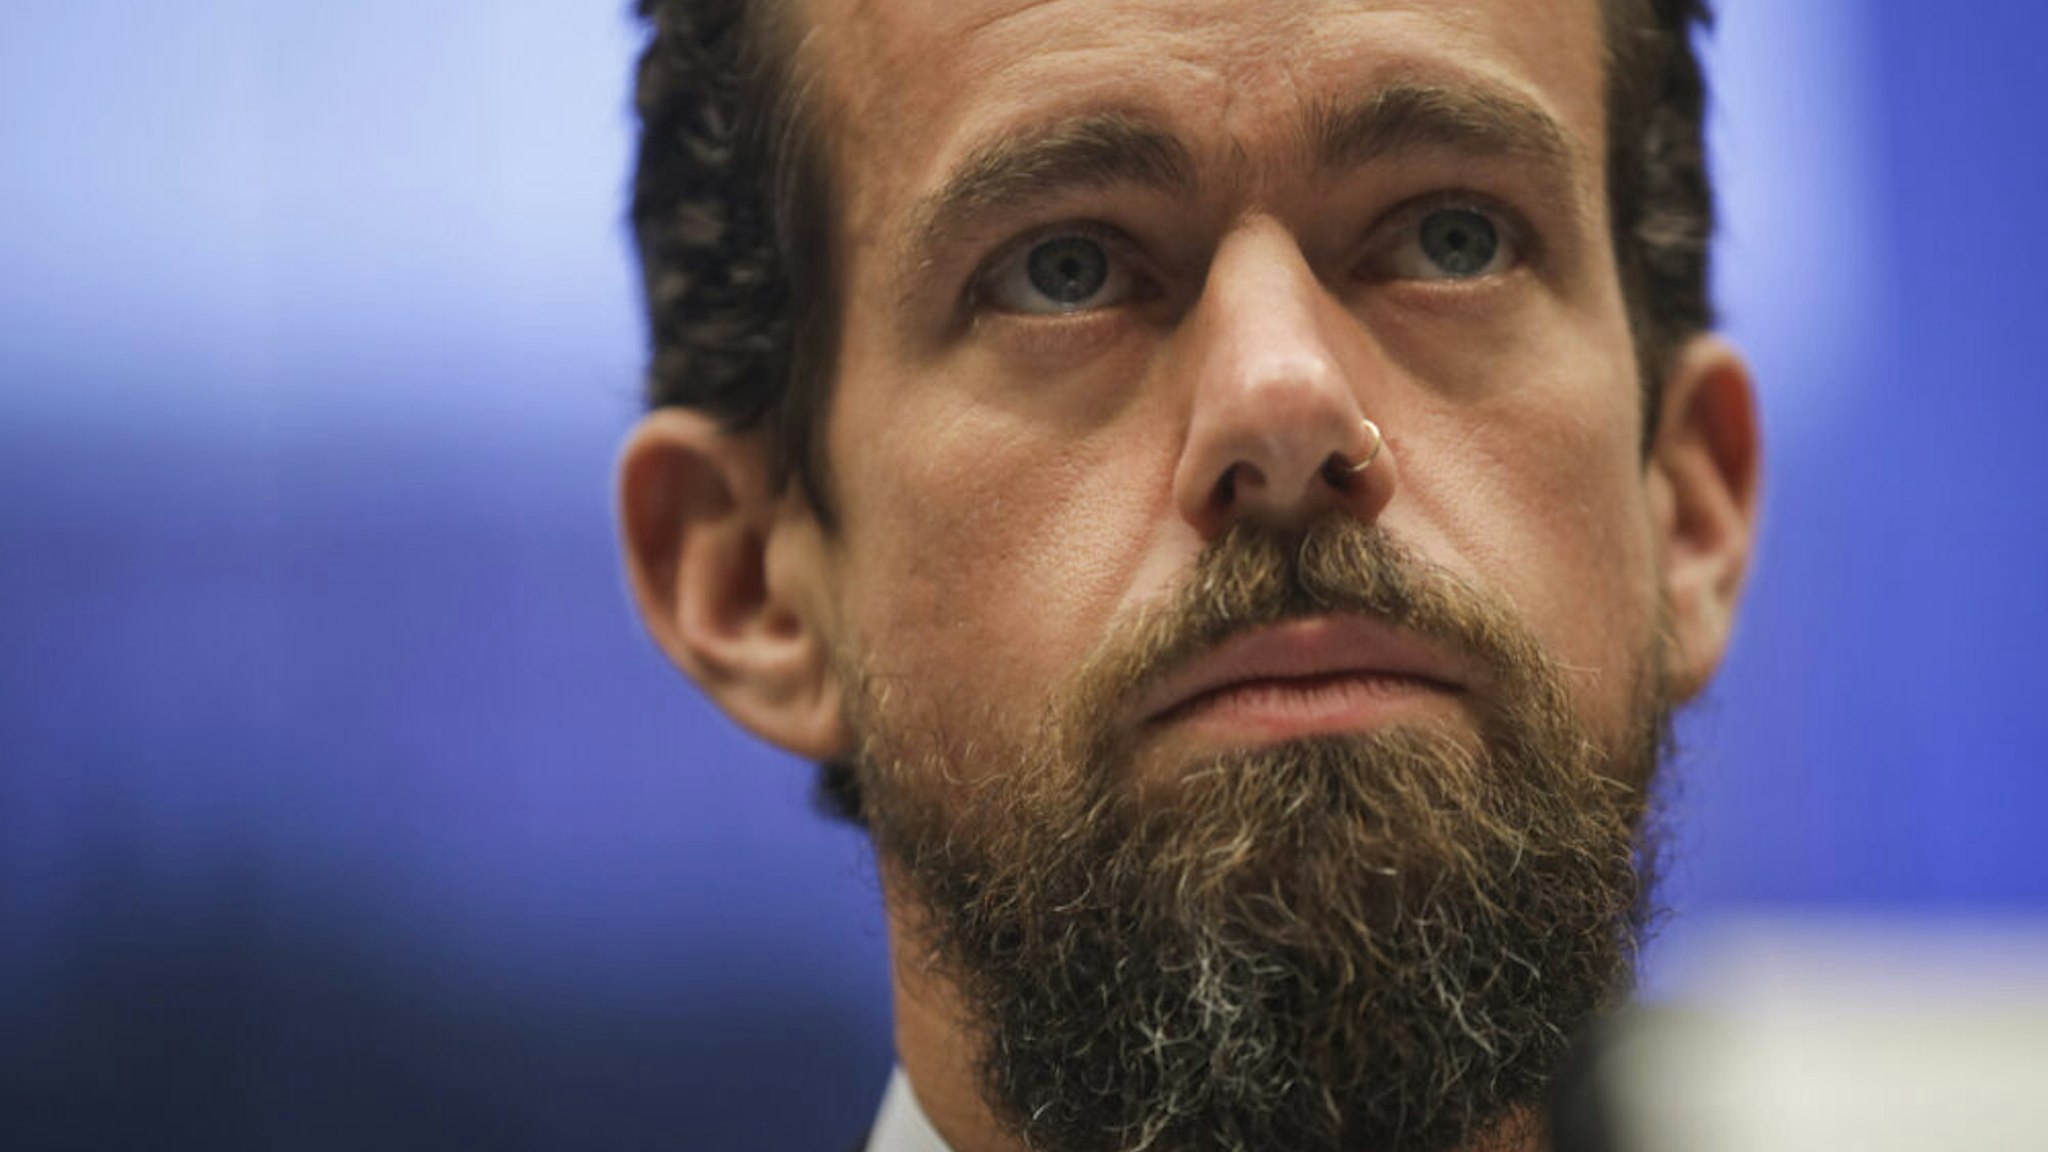 WASHINGTON, DC - SEPTEMBER 5: Twitter chief executive officer Jack Dorsey testifies during a House Committee on Energy and Commerce hearing about Twitter's transparency and accountability, on Capitol Hill, September 5, 2018 in Washington, DC. Earlier in the day, Dorsey faced questions from the Senate Intelligence Committee about how foreign operatives use their platforms in attempts to influence and manipulate public opinion.